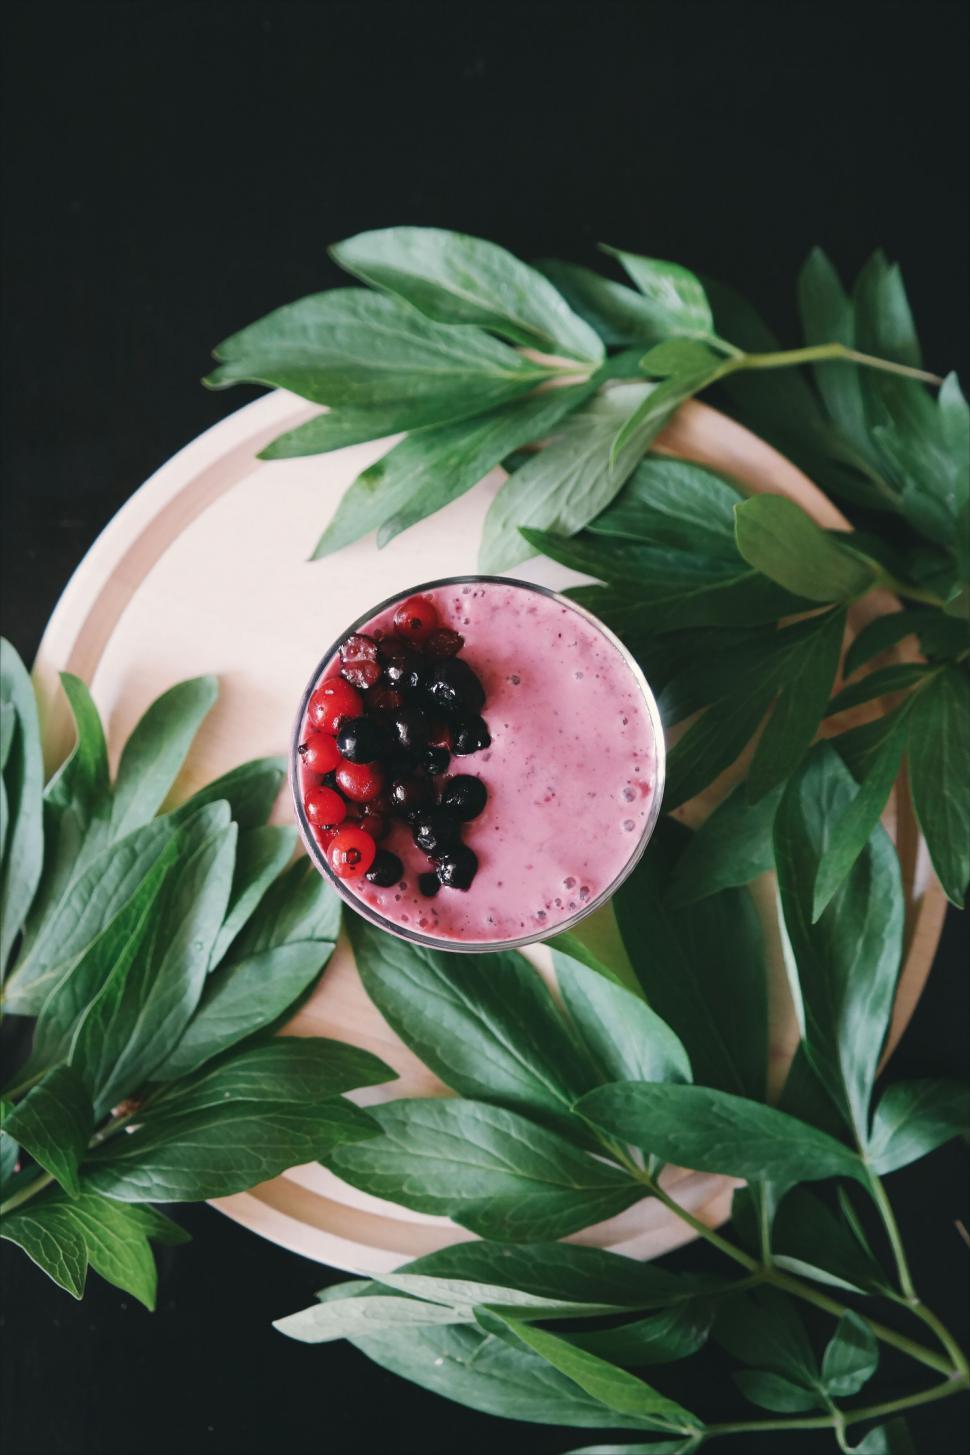 Free Image of Healthy Smoothie With Berries and Green Leaves on Plate 